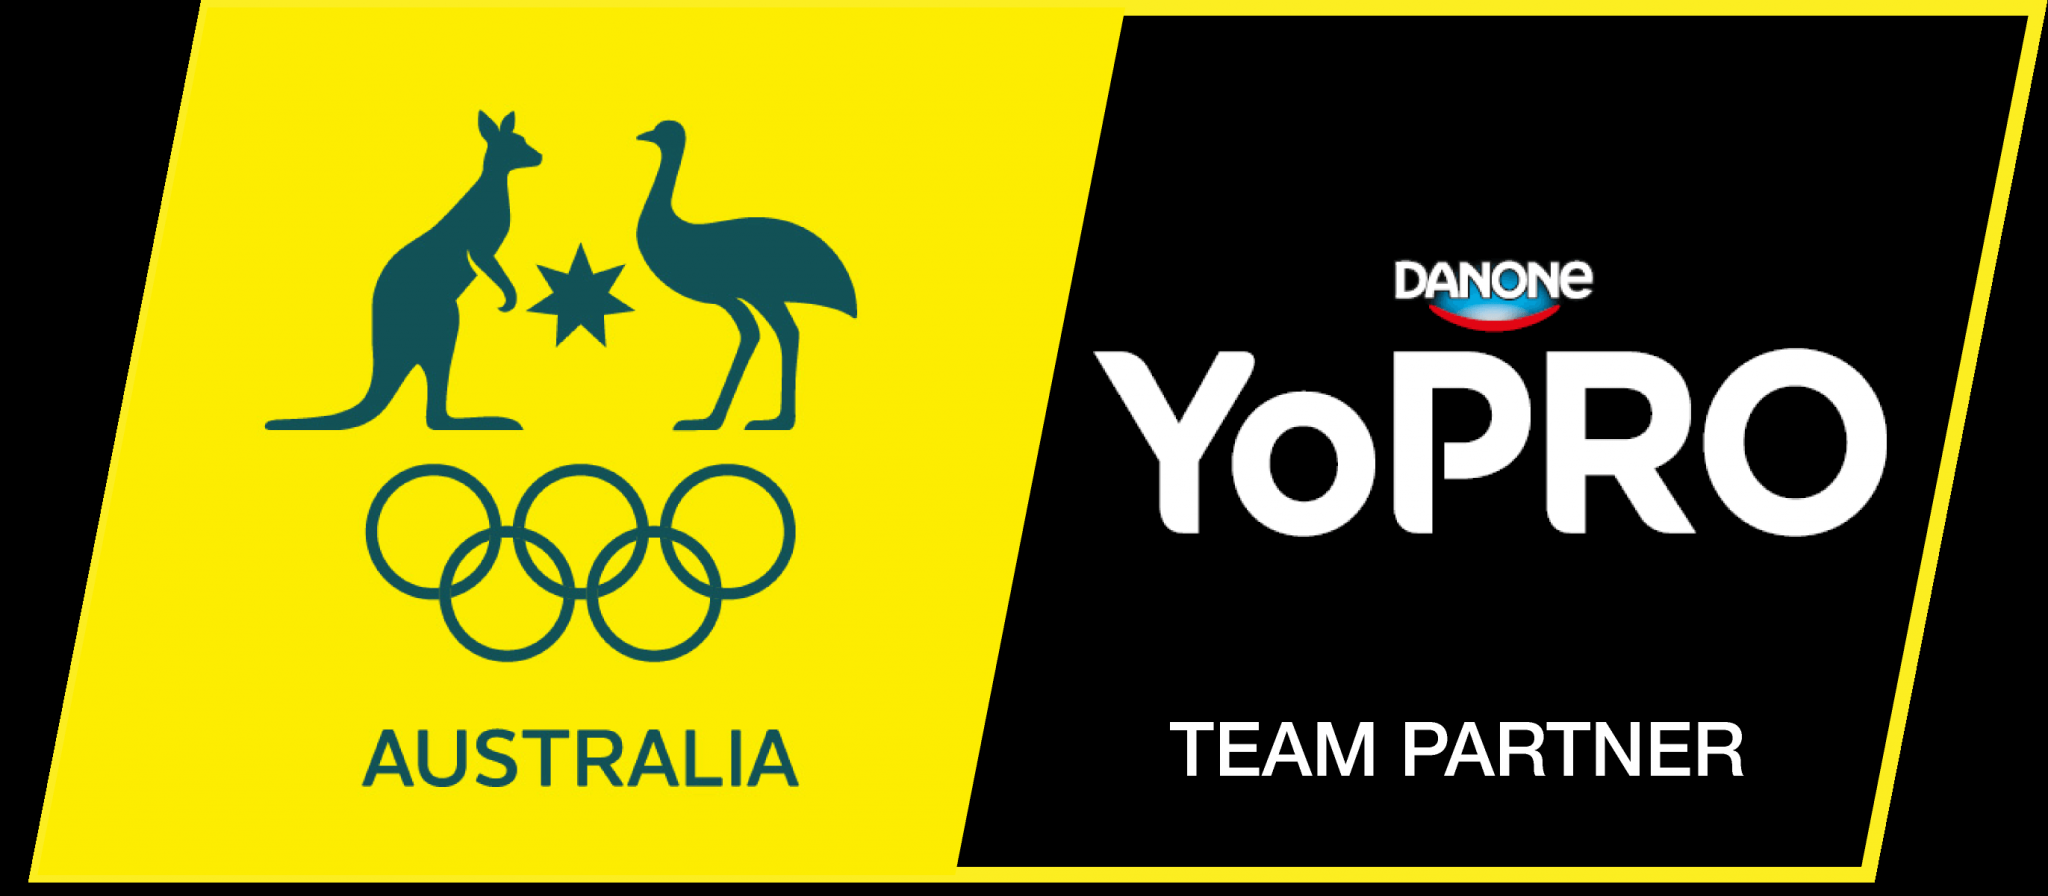 Danone, the leading global food and beverage company, has today announced its YoPRO yoghurt brand as an official partner of the Australian Olympic Committee ©YoPRO